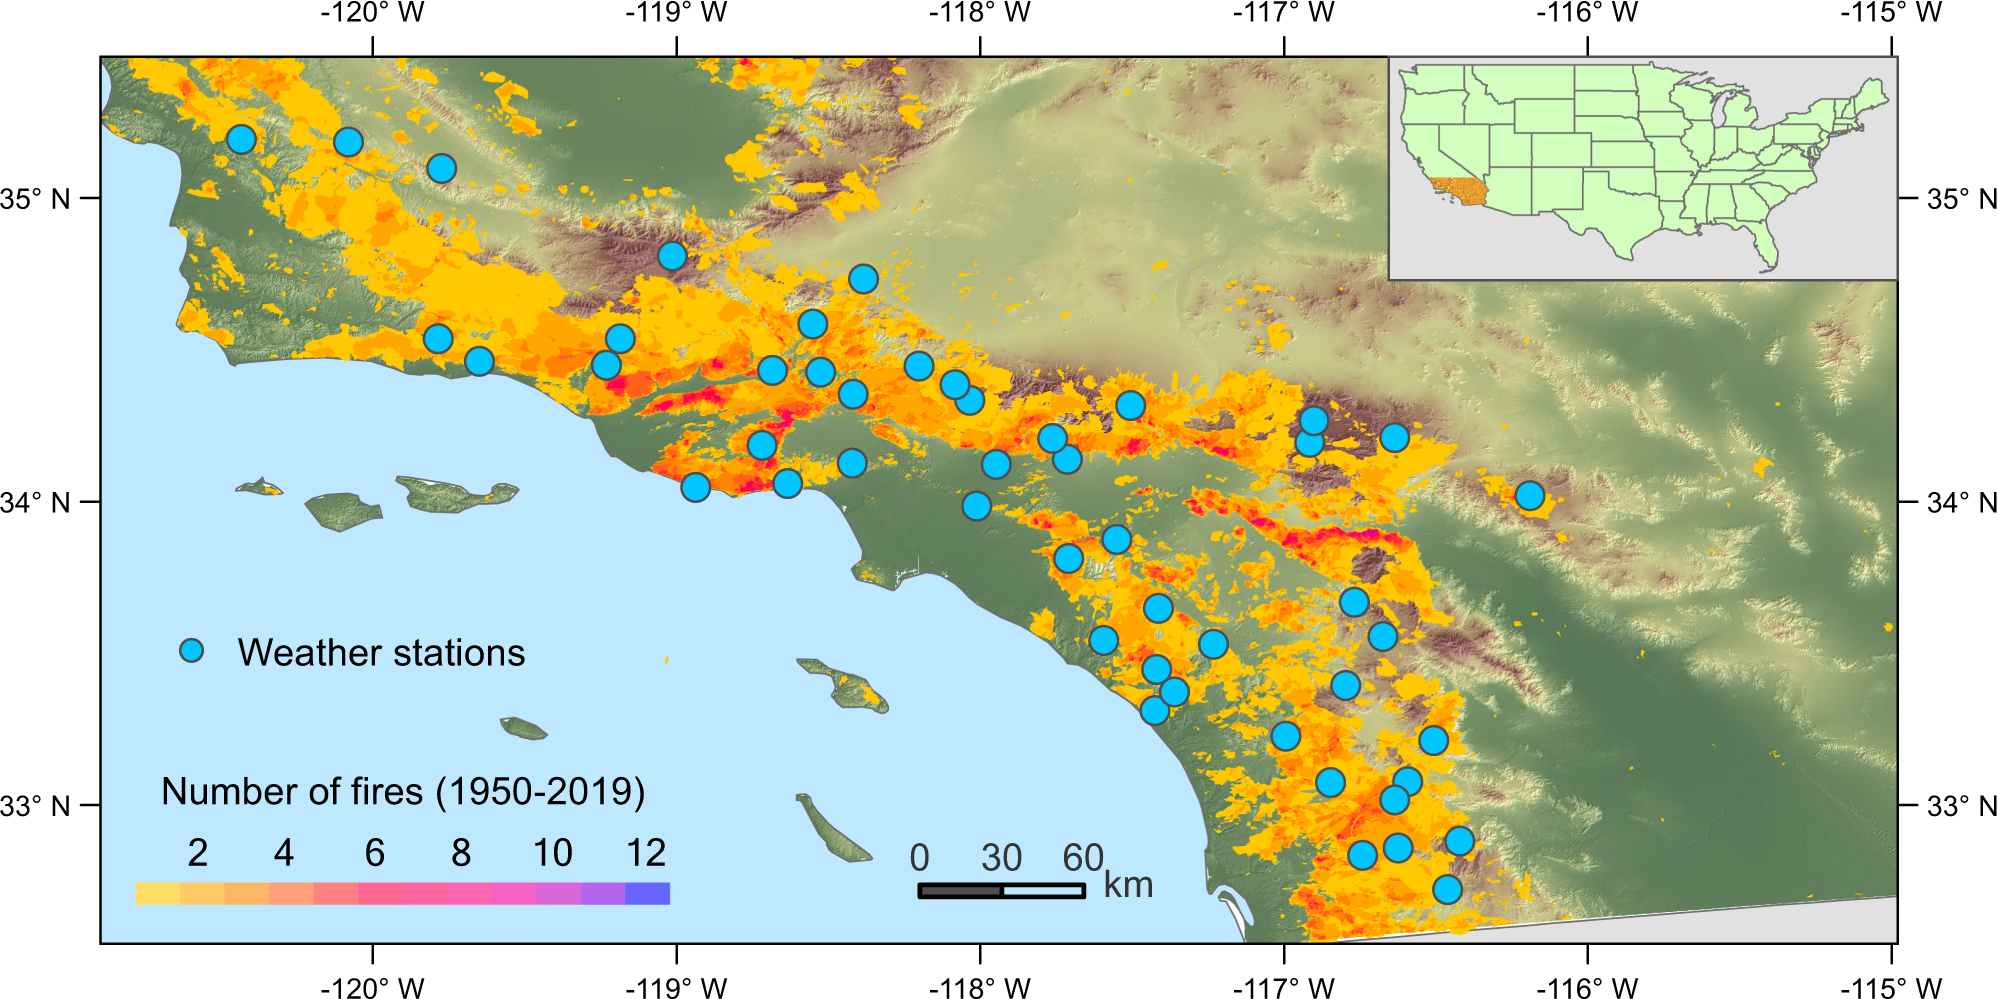 The season for large fires in Southern California is projected to lengthen  in a changing climate | Communications Earth & Environment